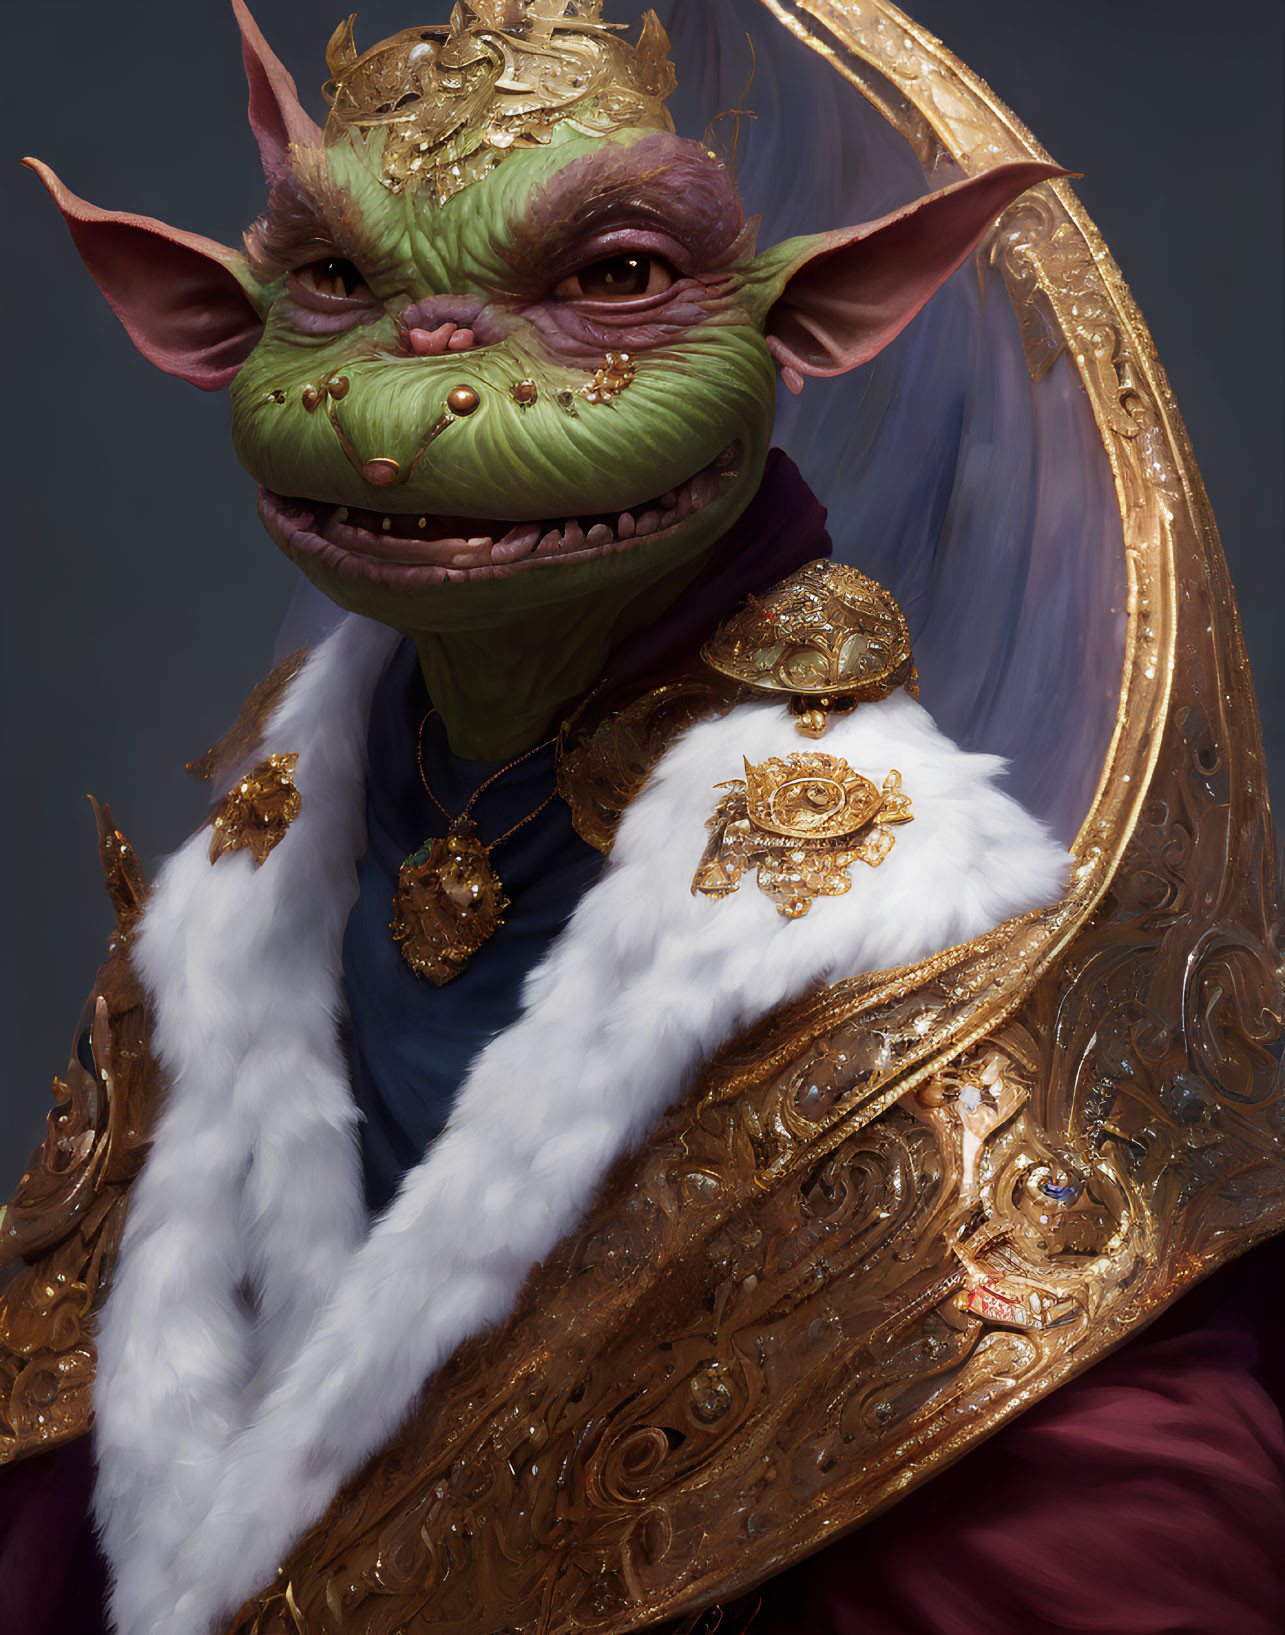 Regal goblin in golden armor and fur collar on red robe